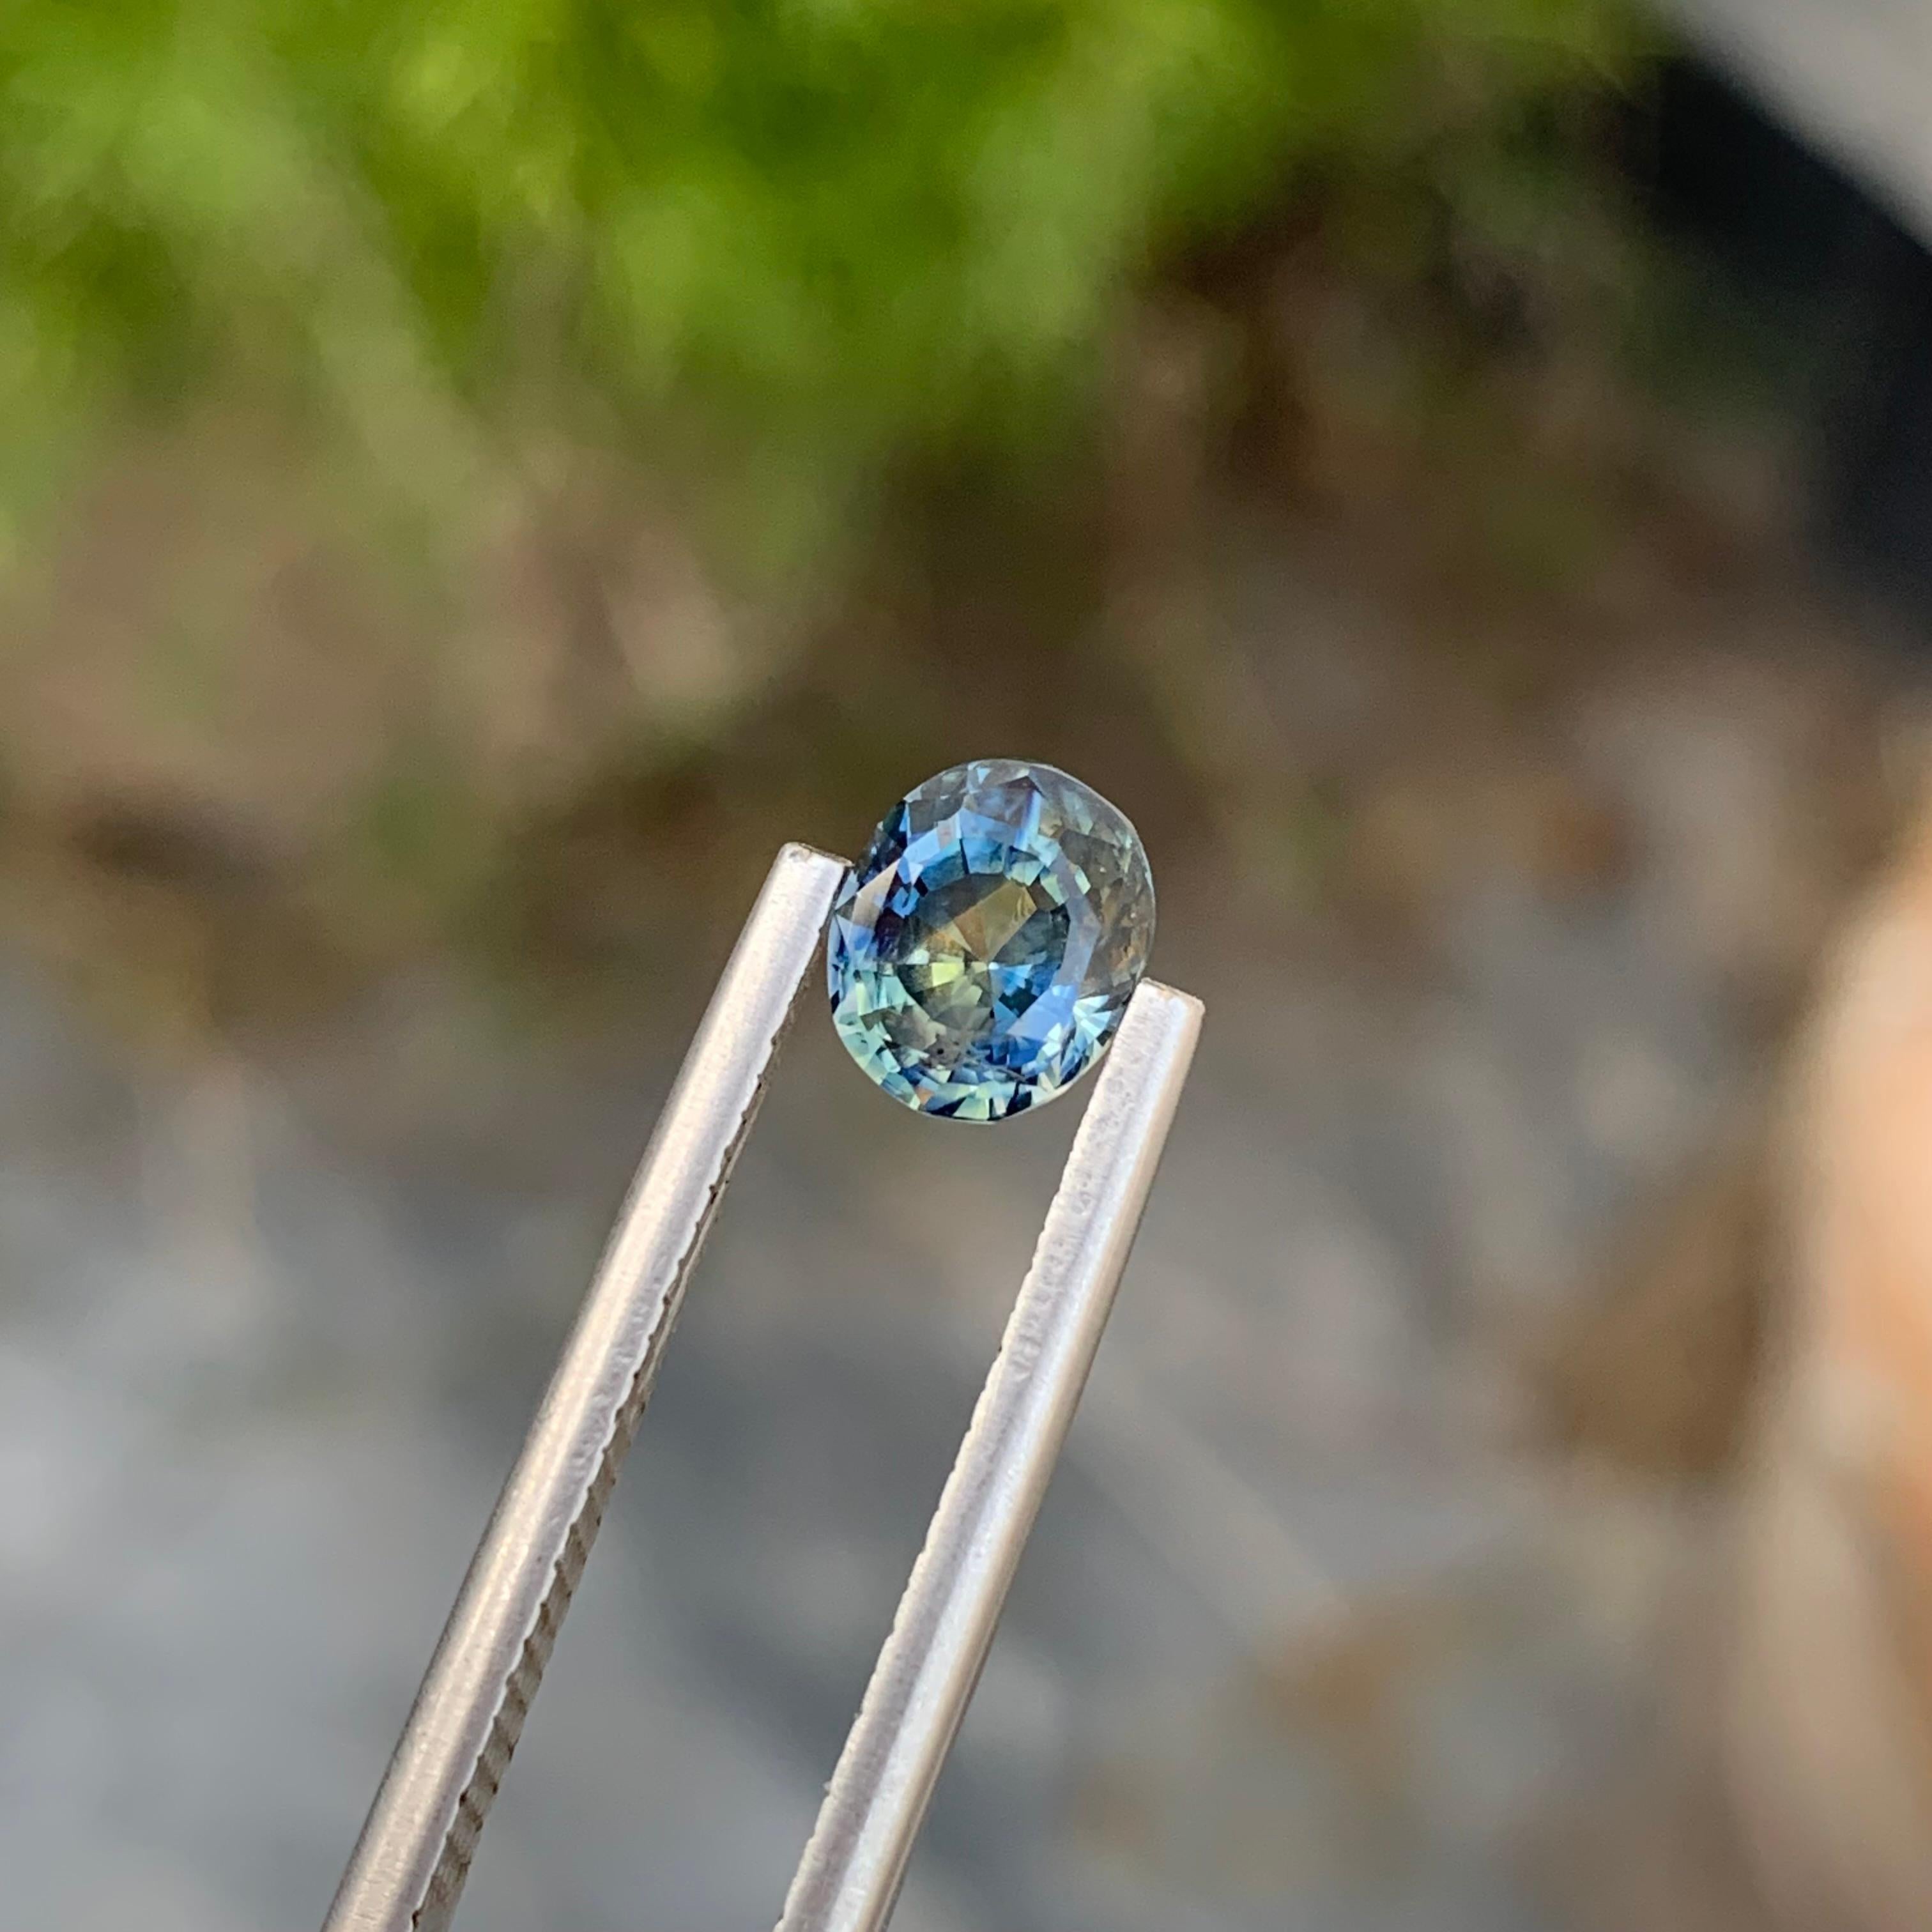 1.55 Carat Faceted Yellowish Blue Sapphire Oval Shape Gem From Madagascar Mine For Sale 3